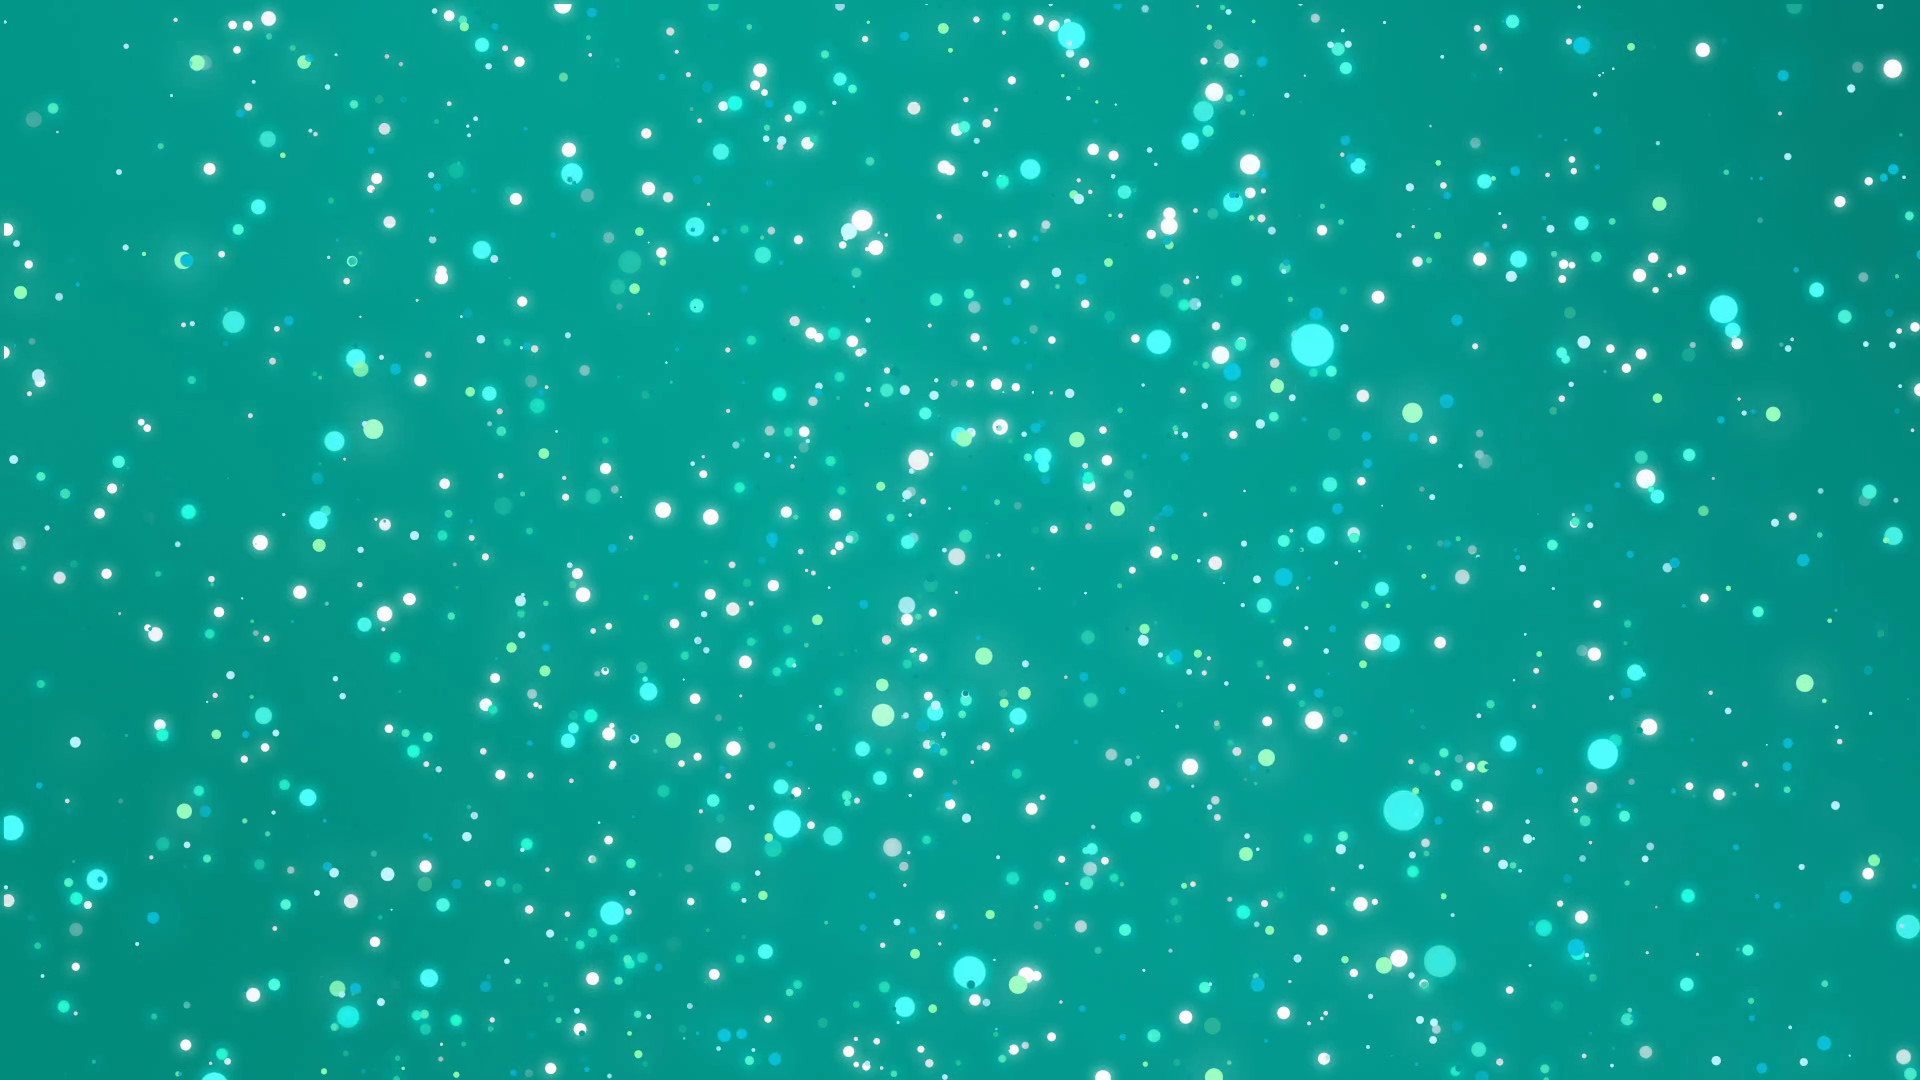 1920x1080 Beautiful festive green teal glitter background with flickering colorful  light particles Motion Background - Storyblocks Video